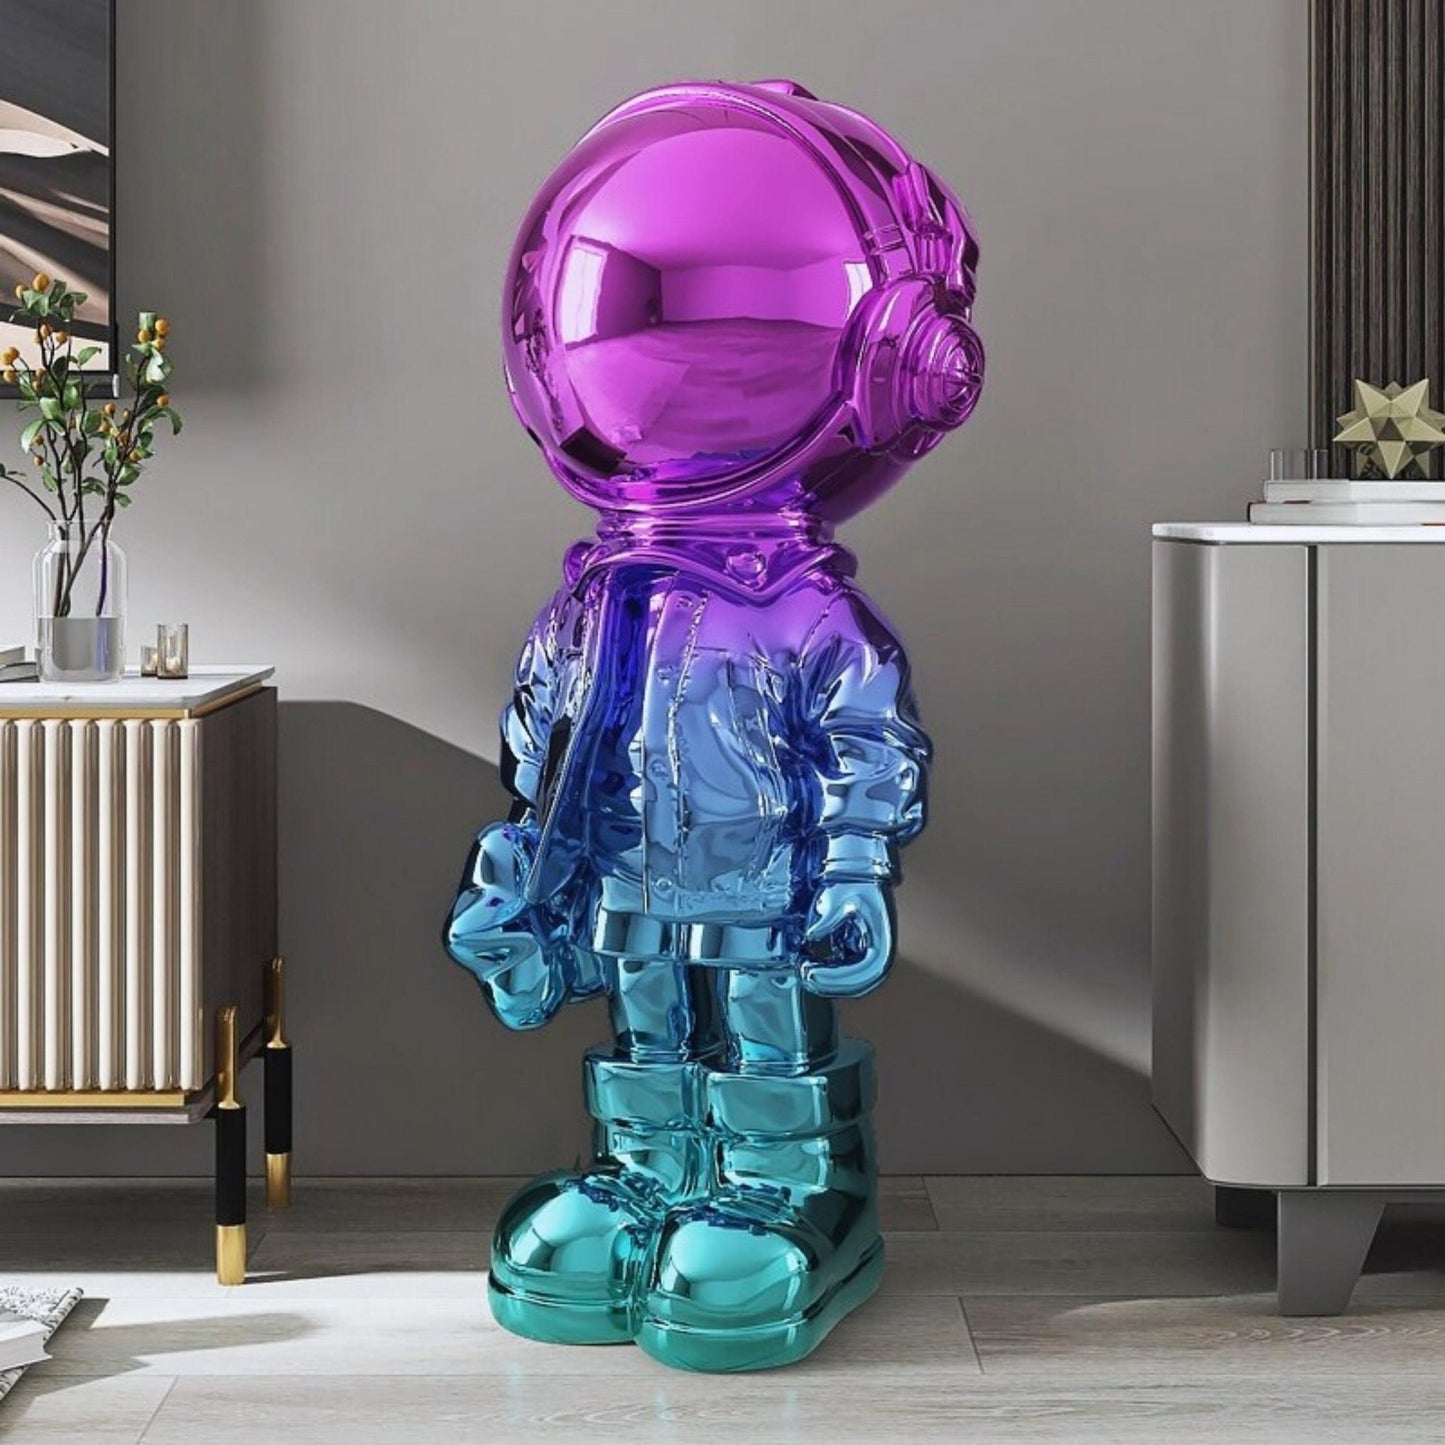 Gradient Astronaut Statue - Space Mesmerise - Space Gifts | Lamps | Statues | Home Decor